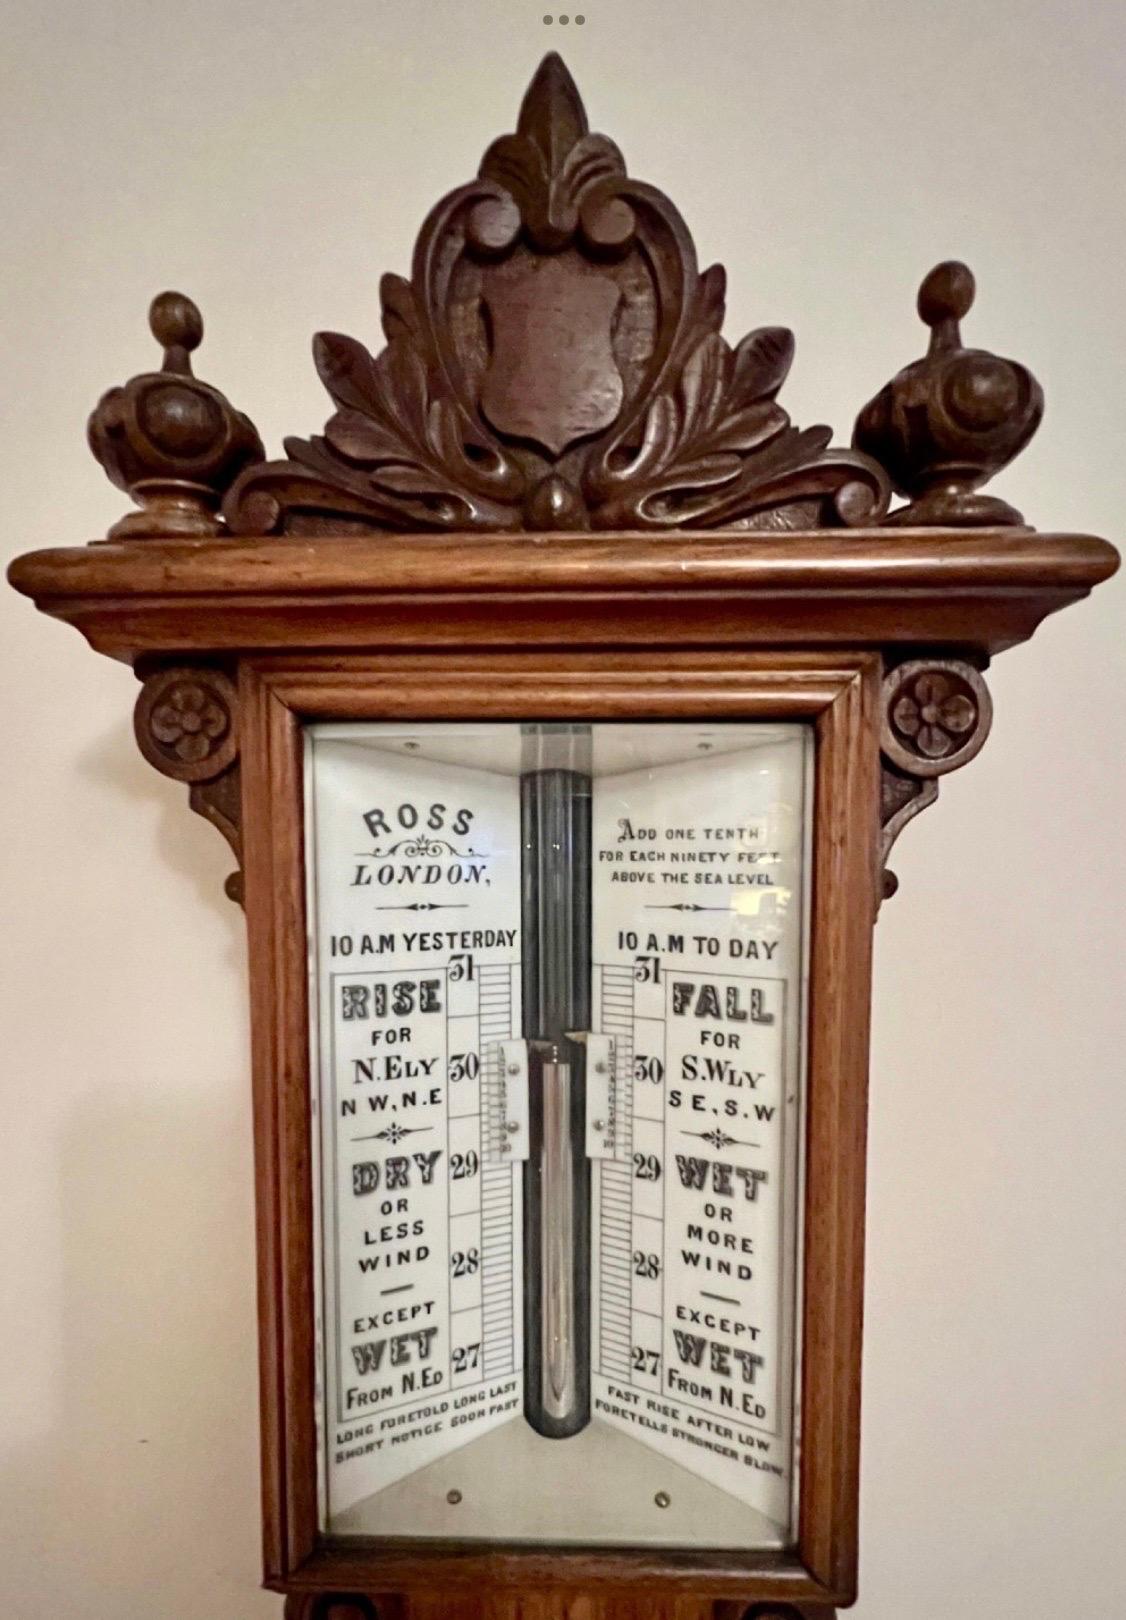 A magnificent large quality antique mercury stick barometer by Ross of London.
The oak case with a well carved pediment and turned finals. The dial having the original twin vernier scale adjuster with weather predictions from 27 to 31 and set